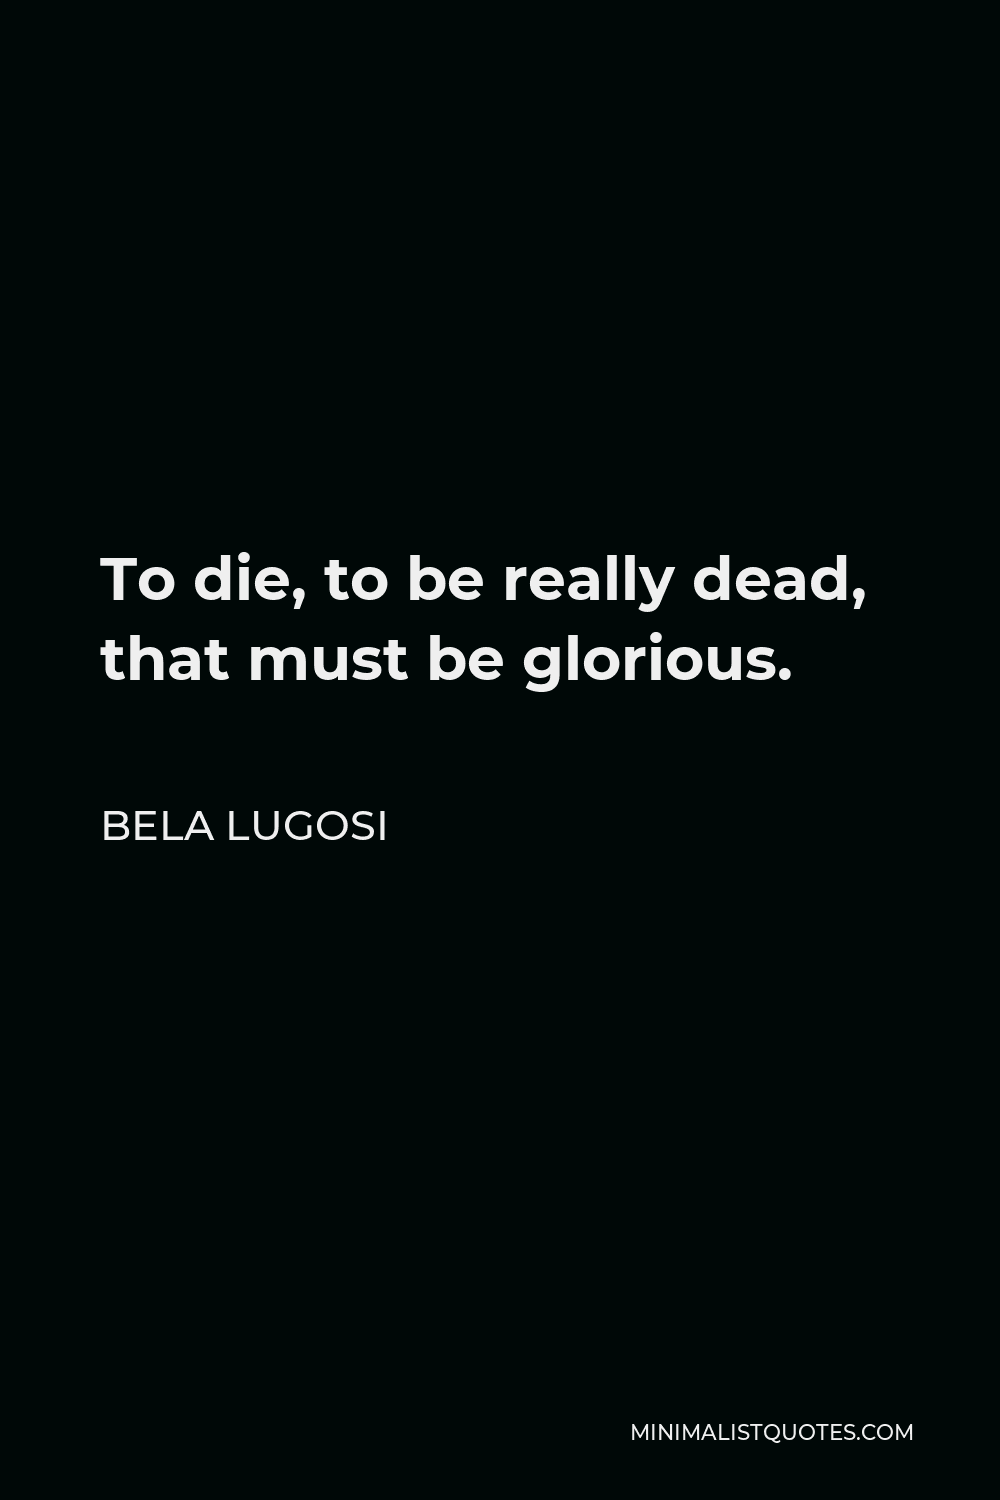 Bela Lugosi Quote - To die, to be really dead, that must be glorious.